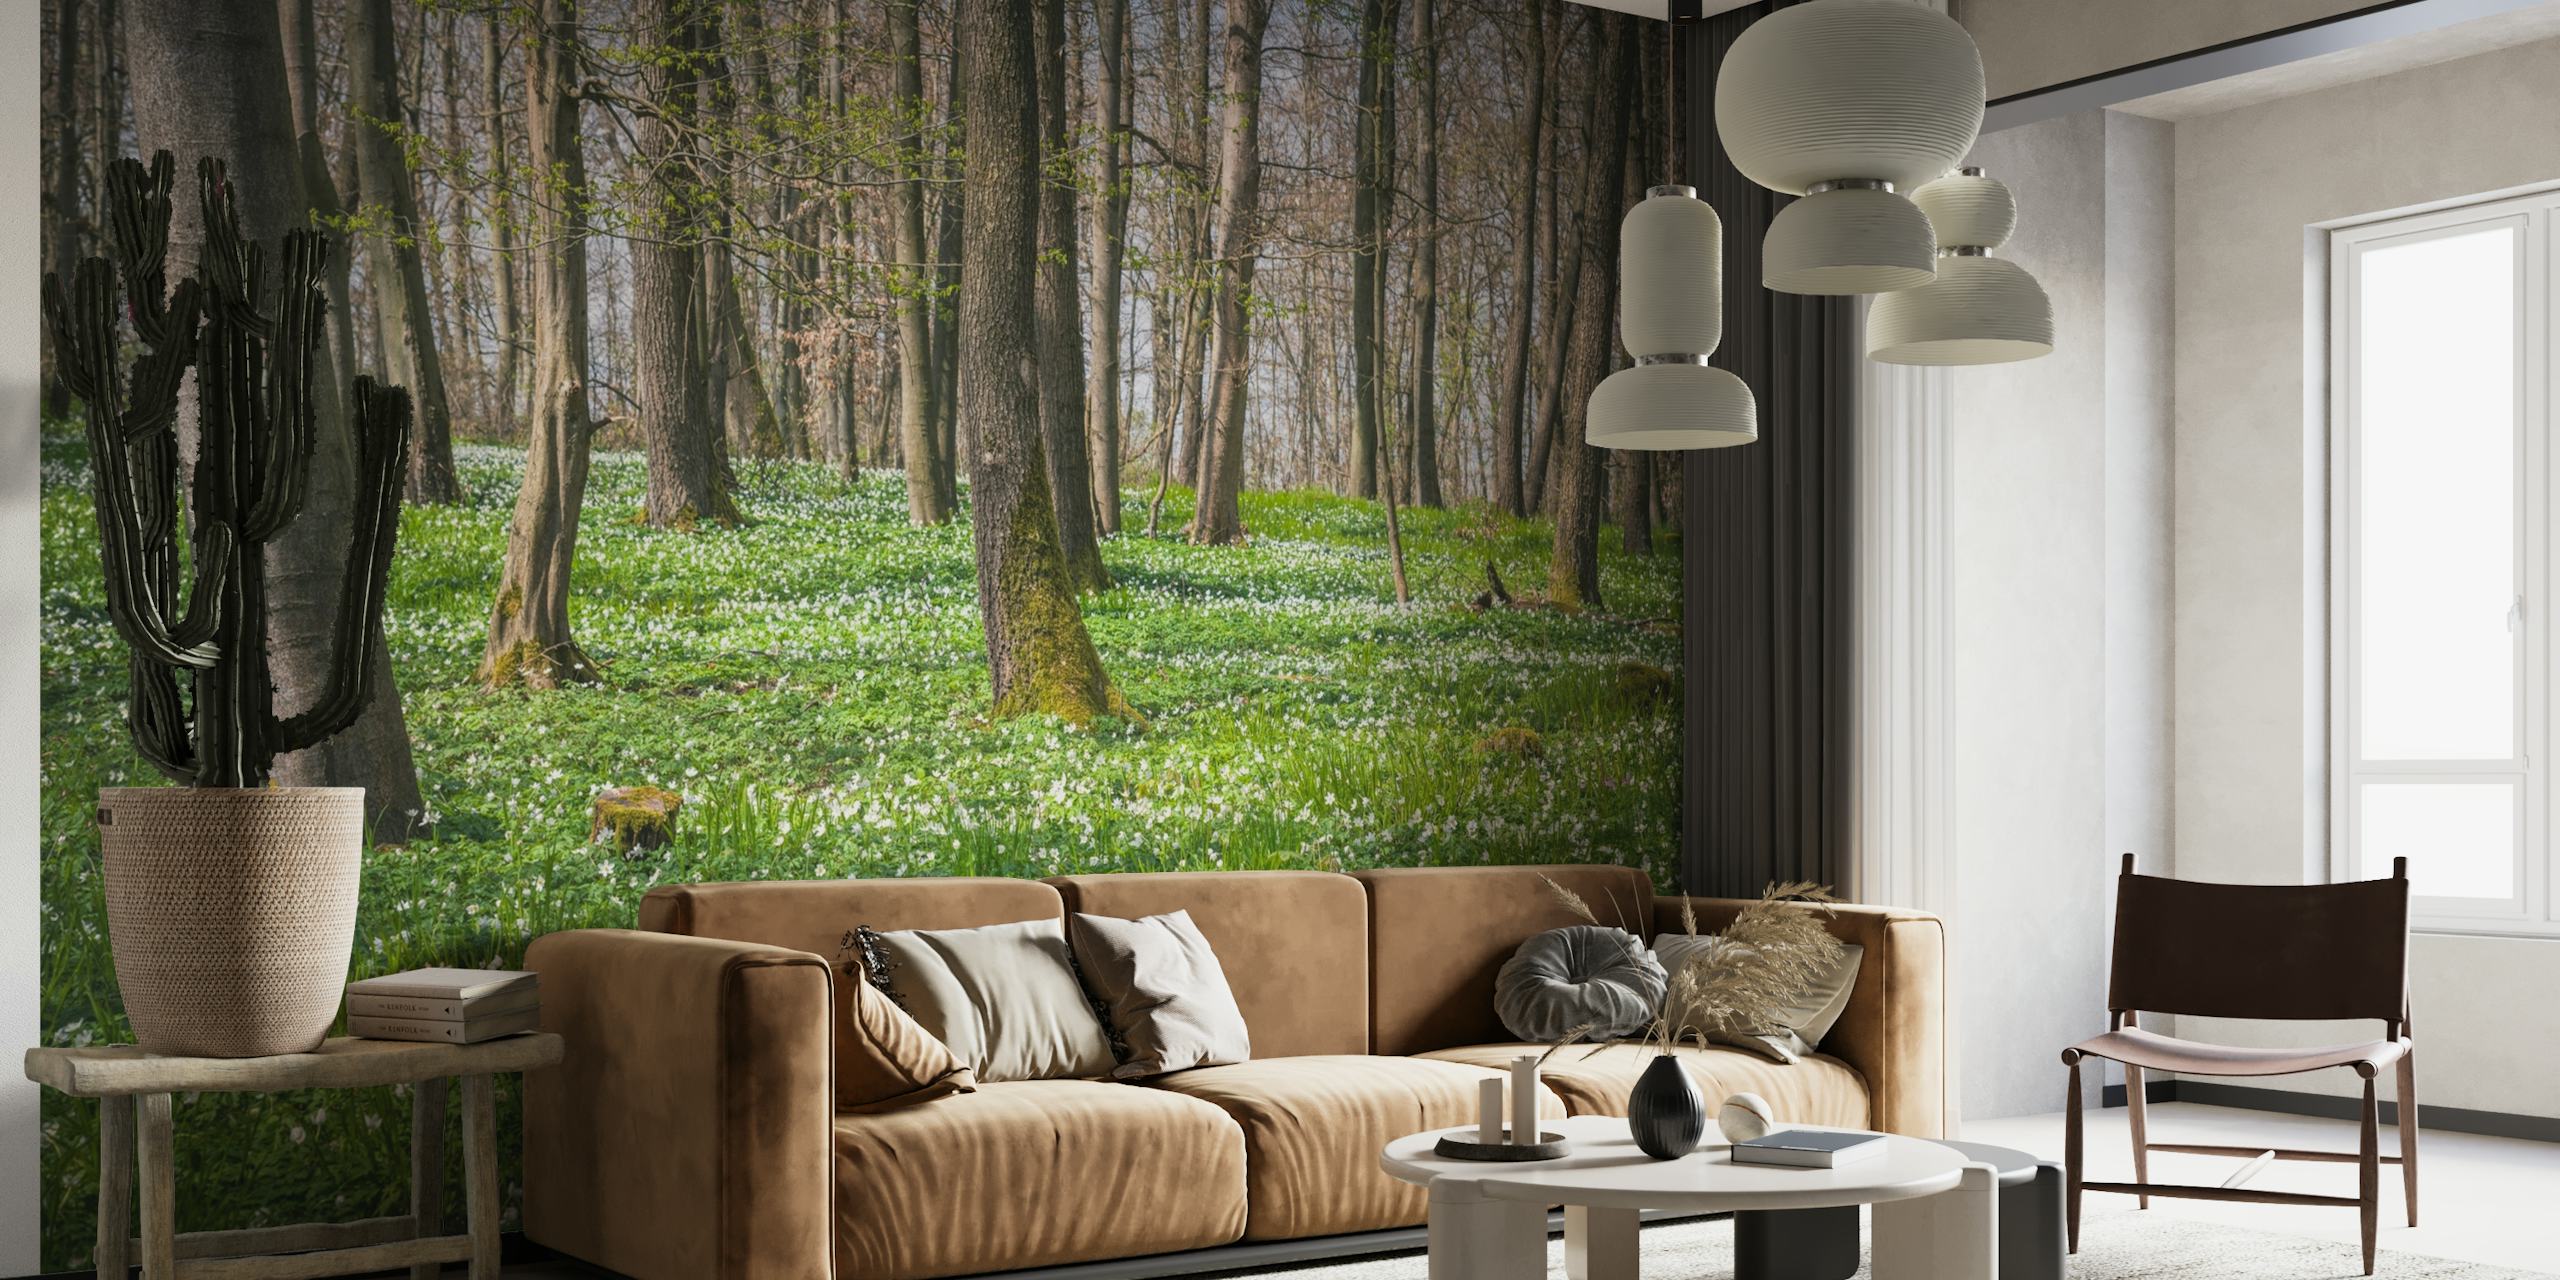 Forest wall mural with wood anemones covering the ground, bringing a touch of spring to your room.